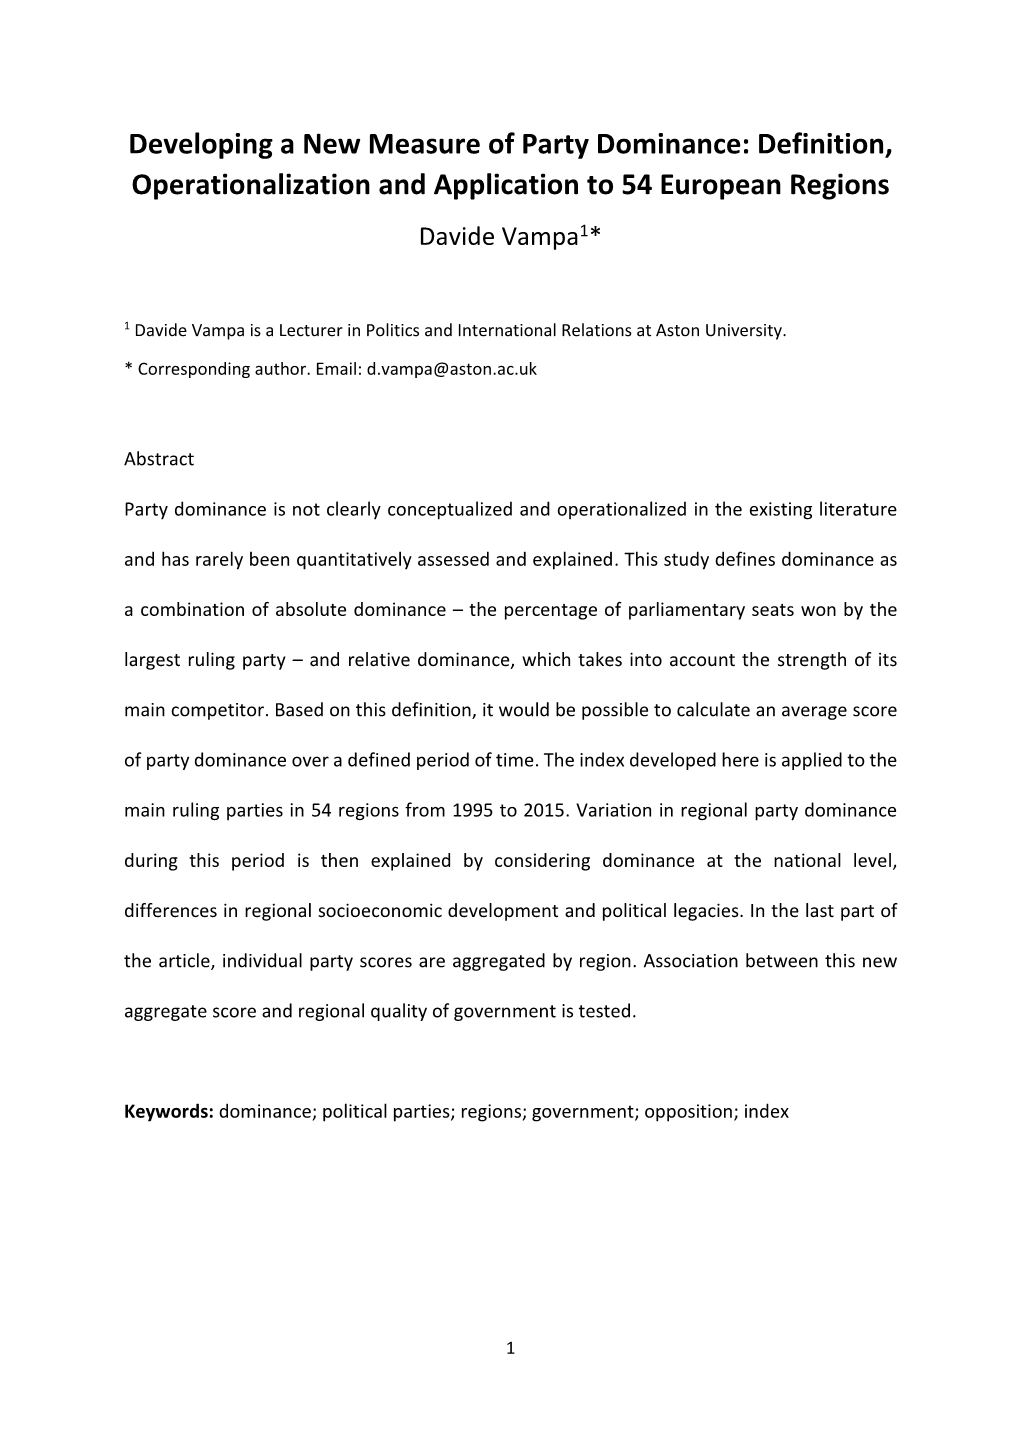 Developing a New Measure of Party Dominance: Definition, Operationalization and Application to 54 European Regions Davide Vampa1*